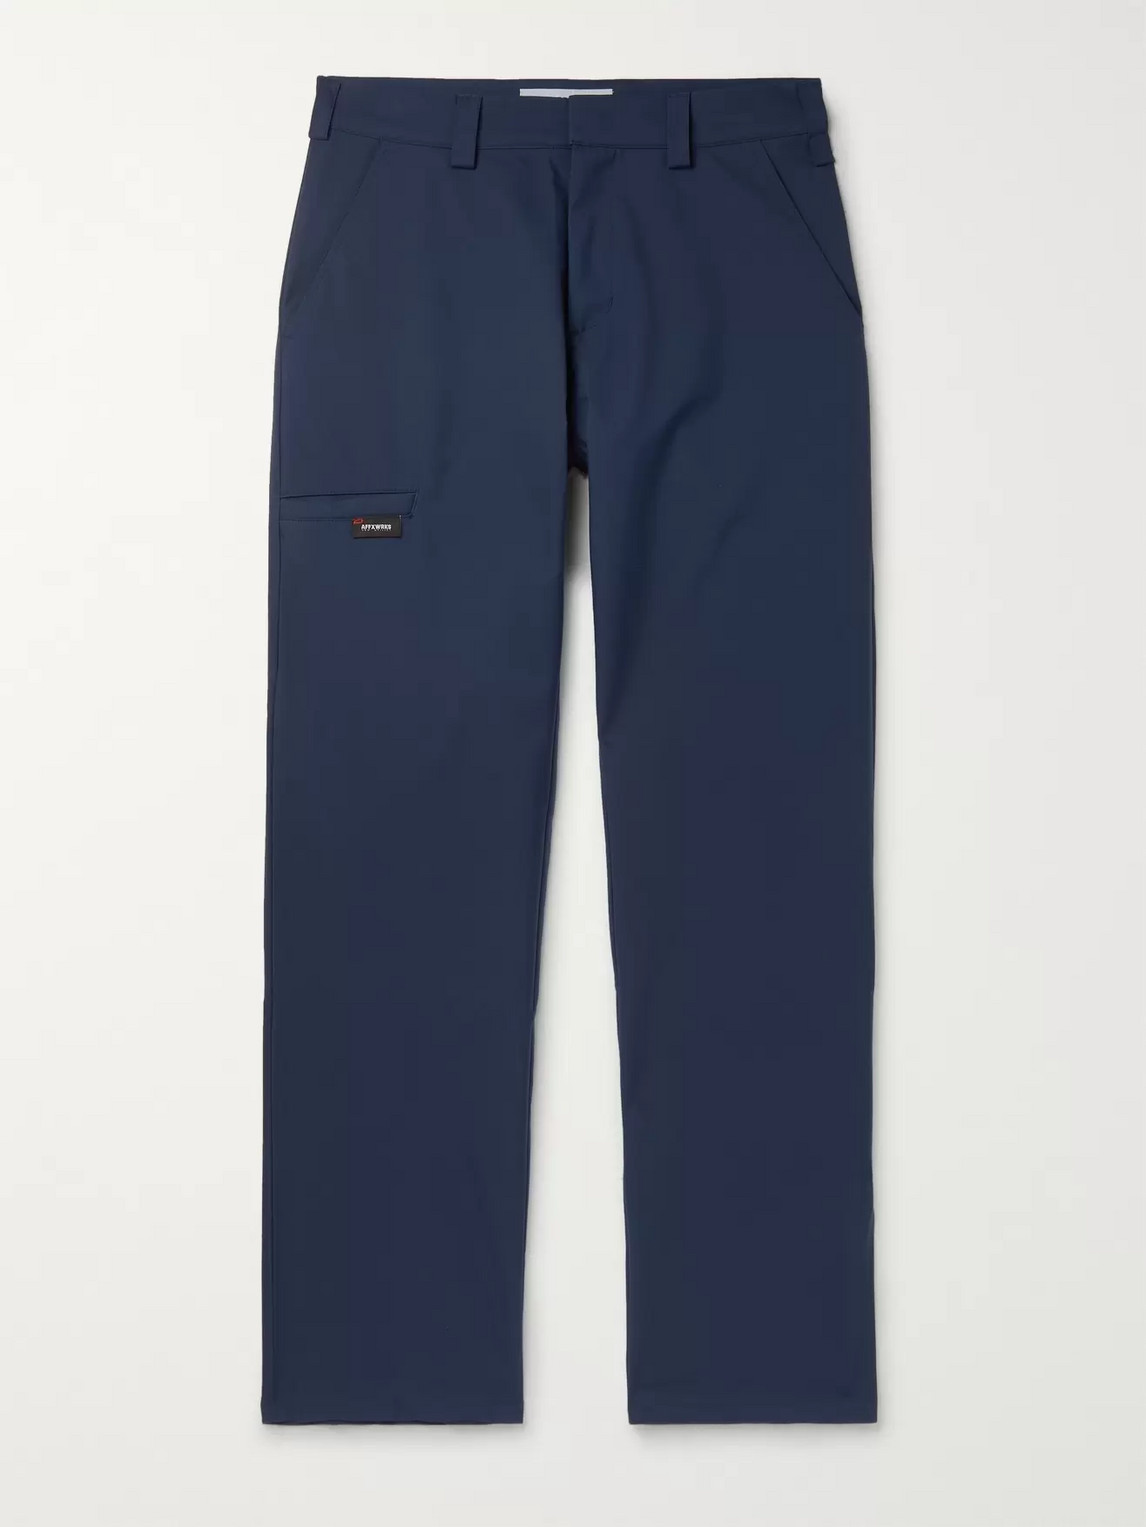 AFFIX NAVY TWILL TROUSERS